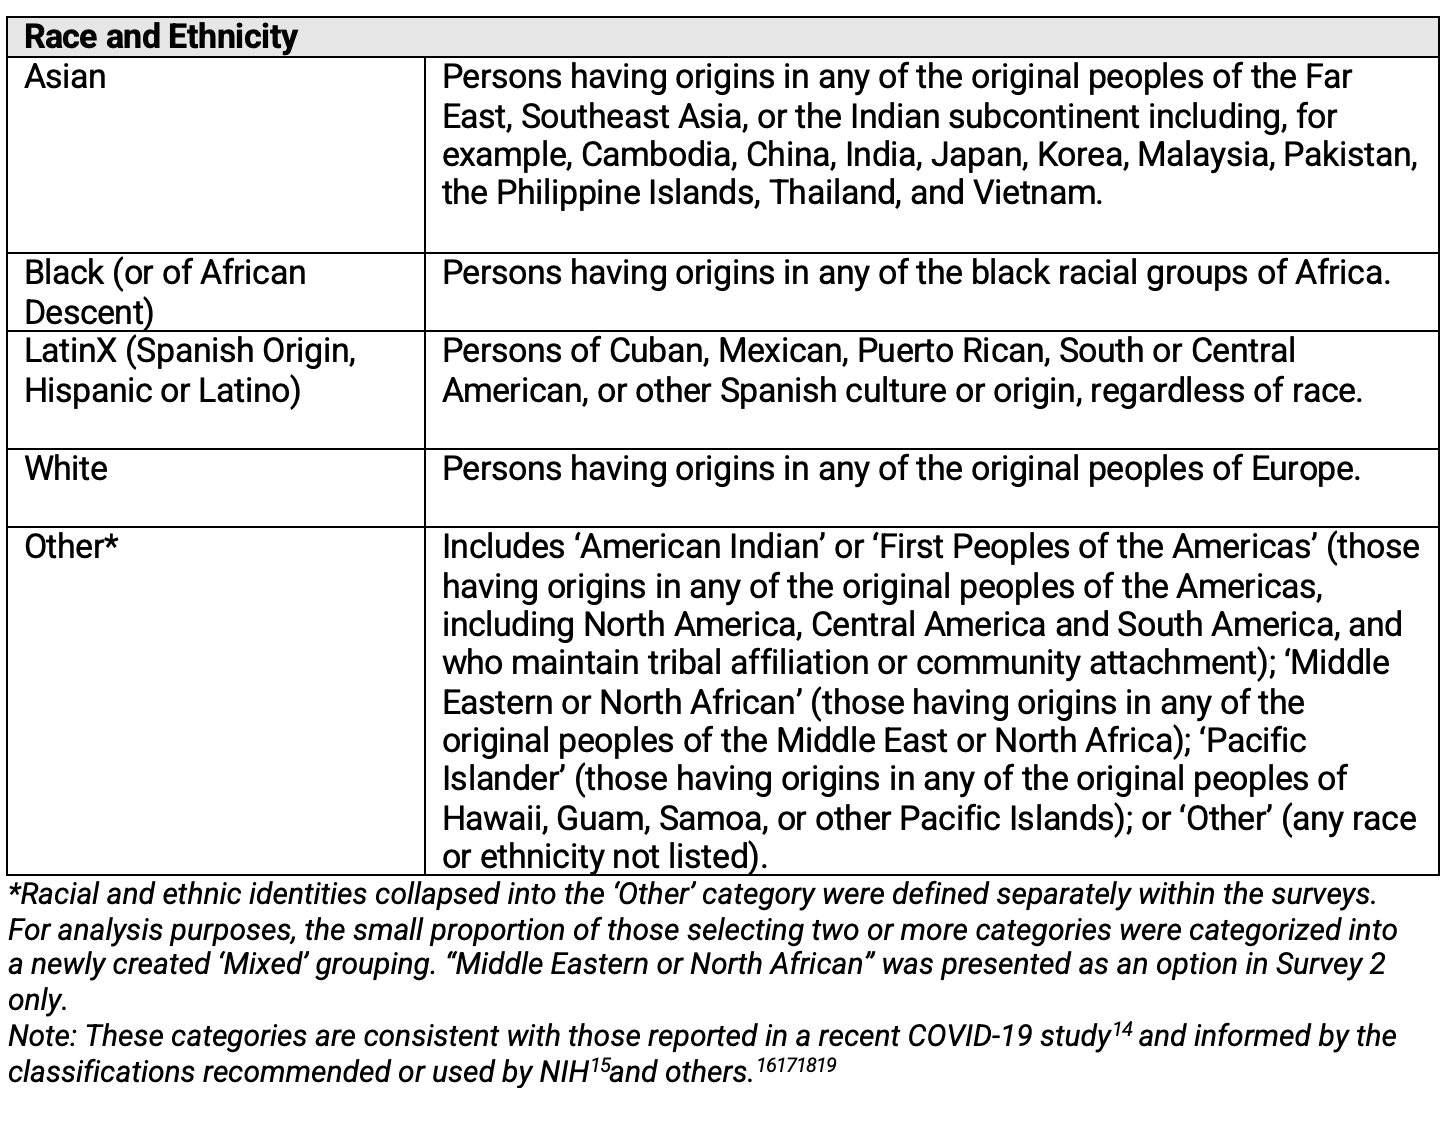 Table 1. Race and Ethnicity—Definitions Presented to Respondents